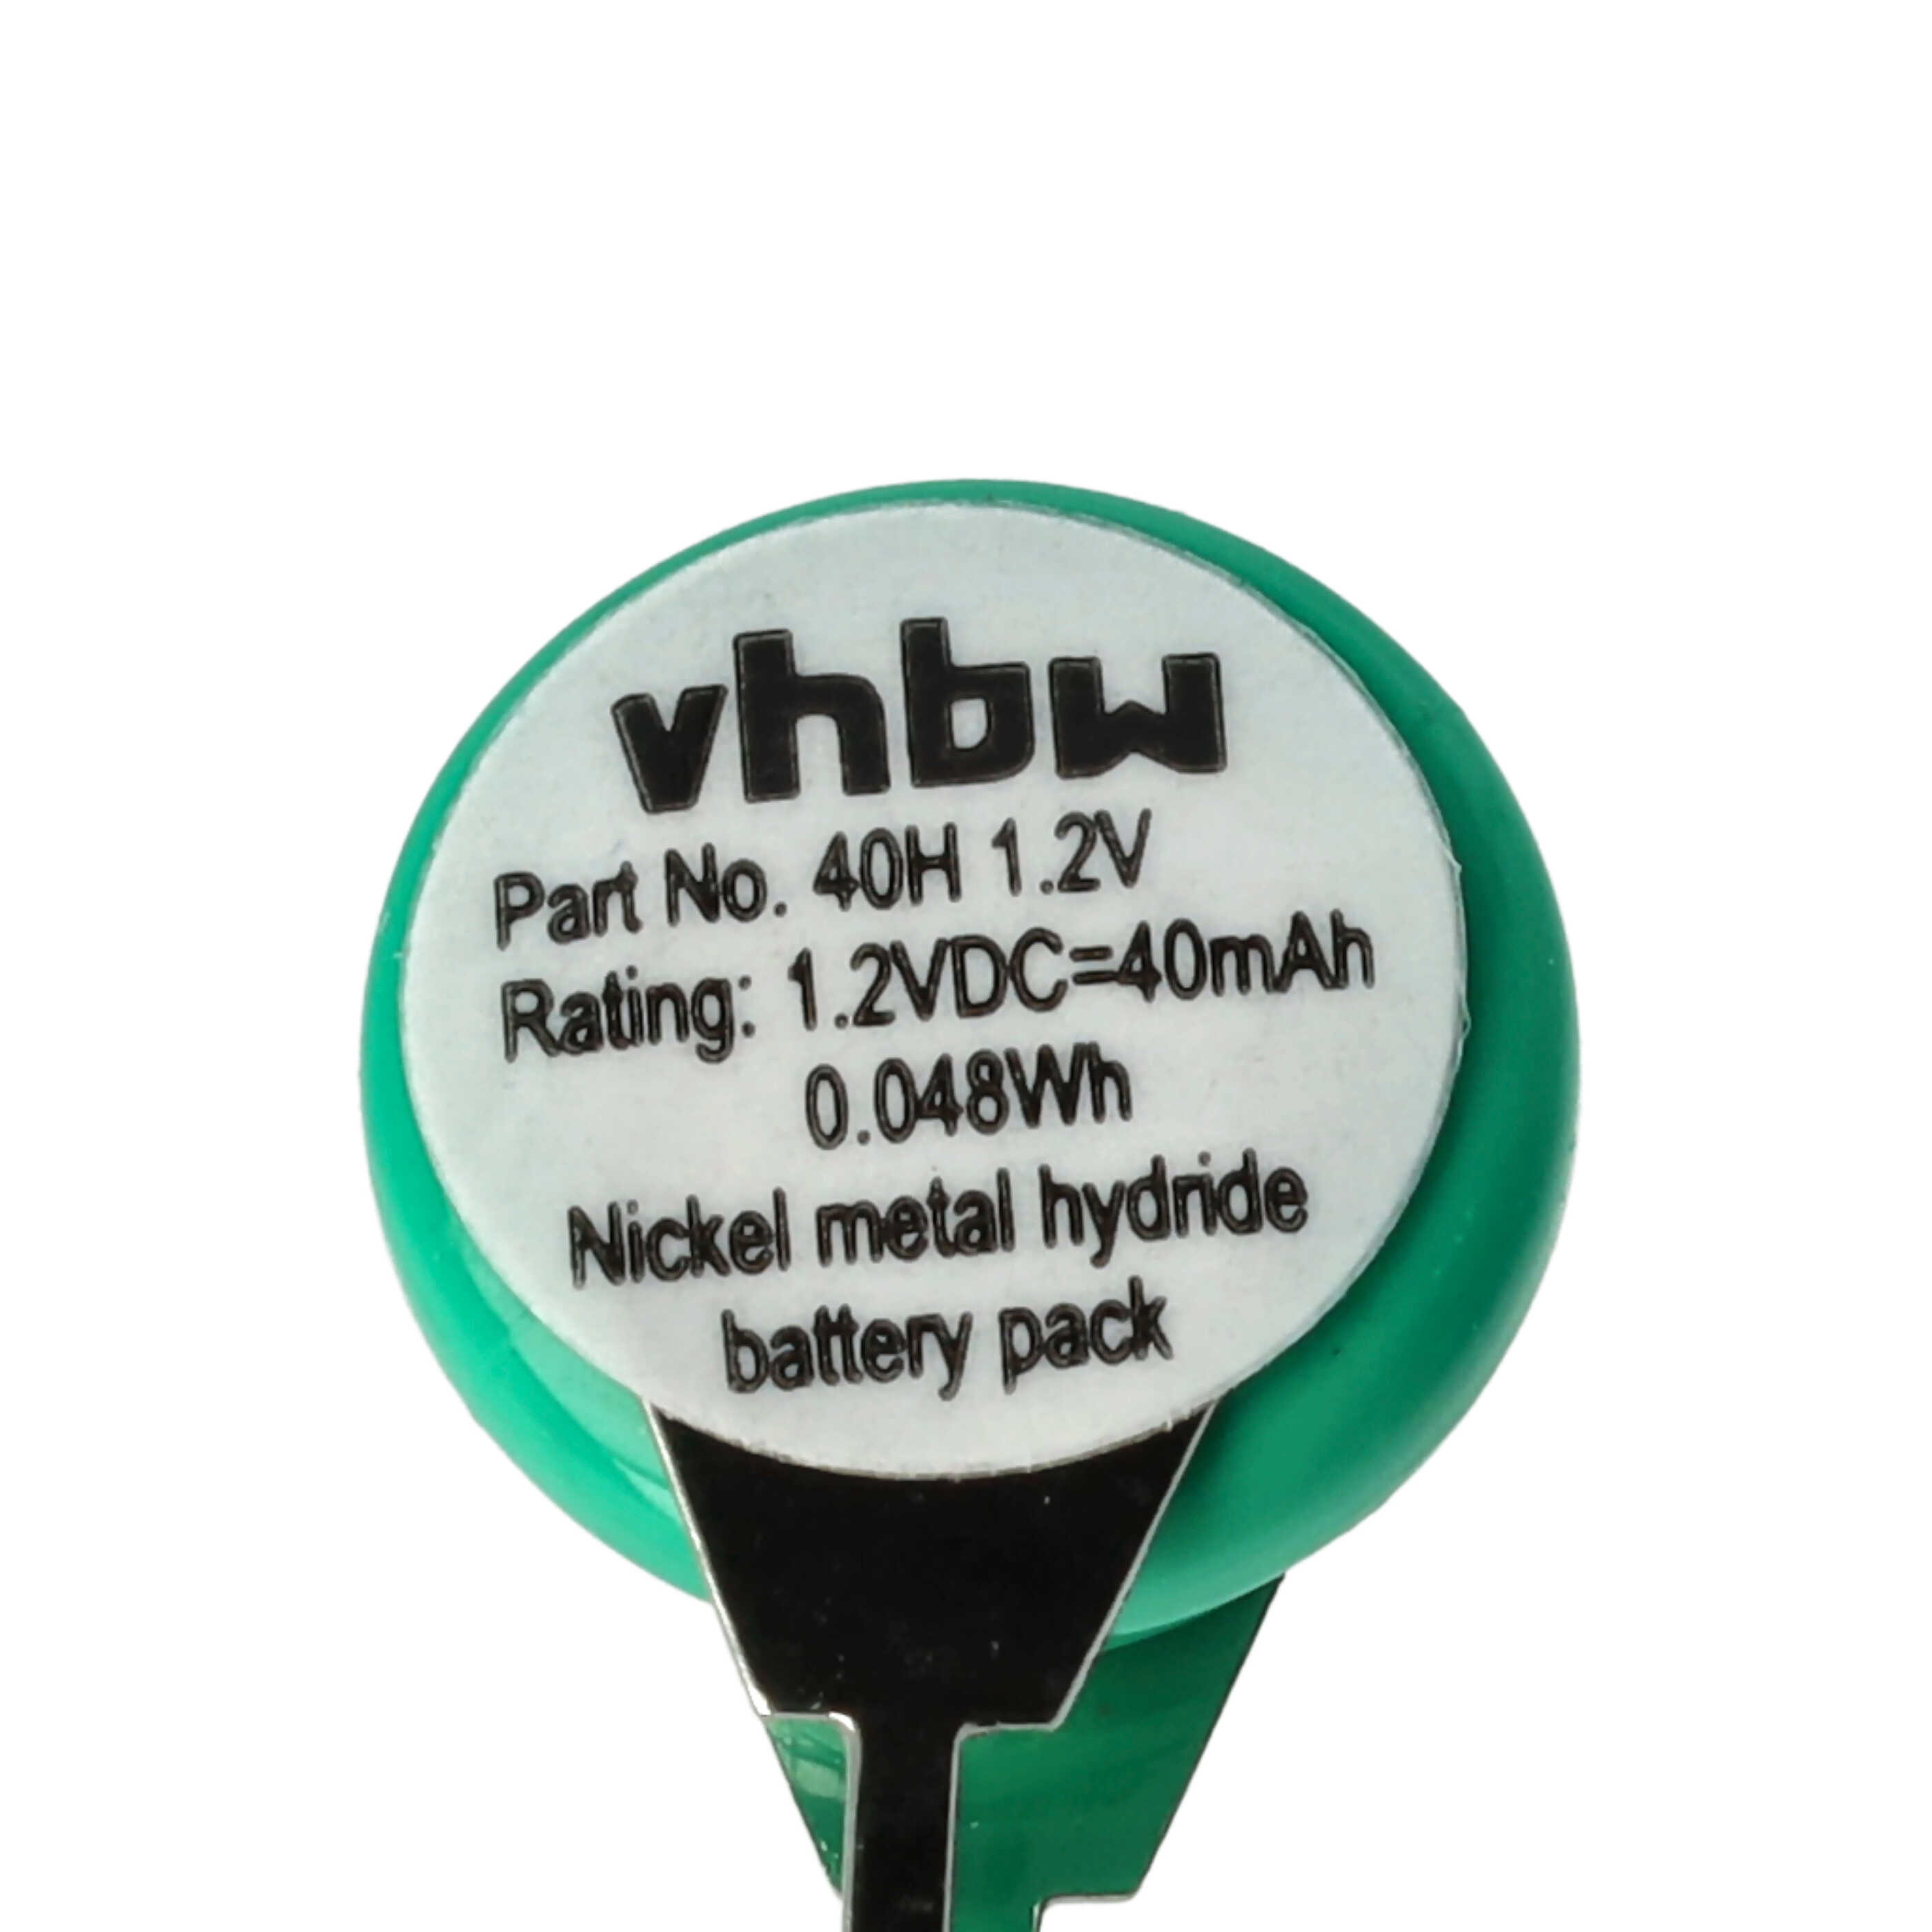 Button Cell Battery (1x Cell) Type 1/V40H 2 Pins for Model Building Solar Lamps etc. - 40mAh 1.2V NiMH